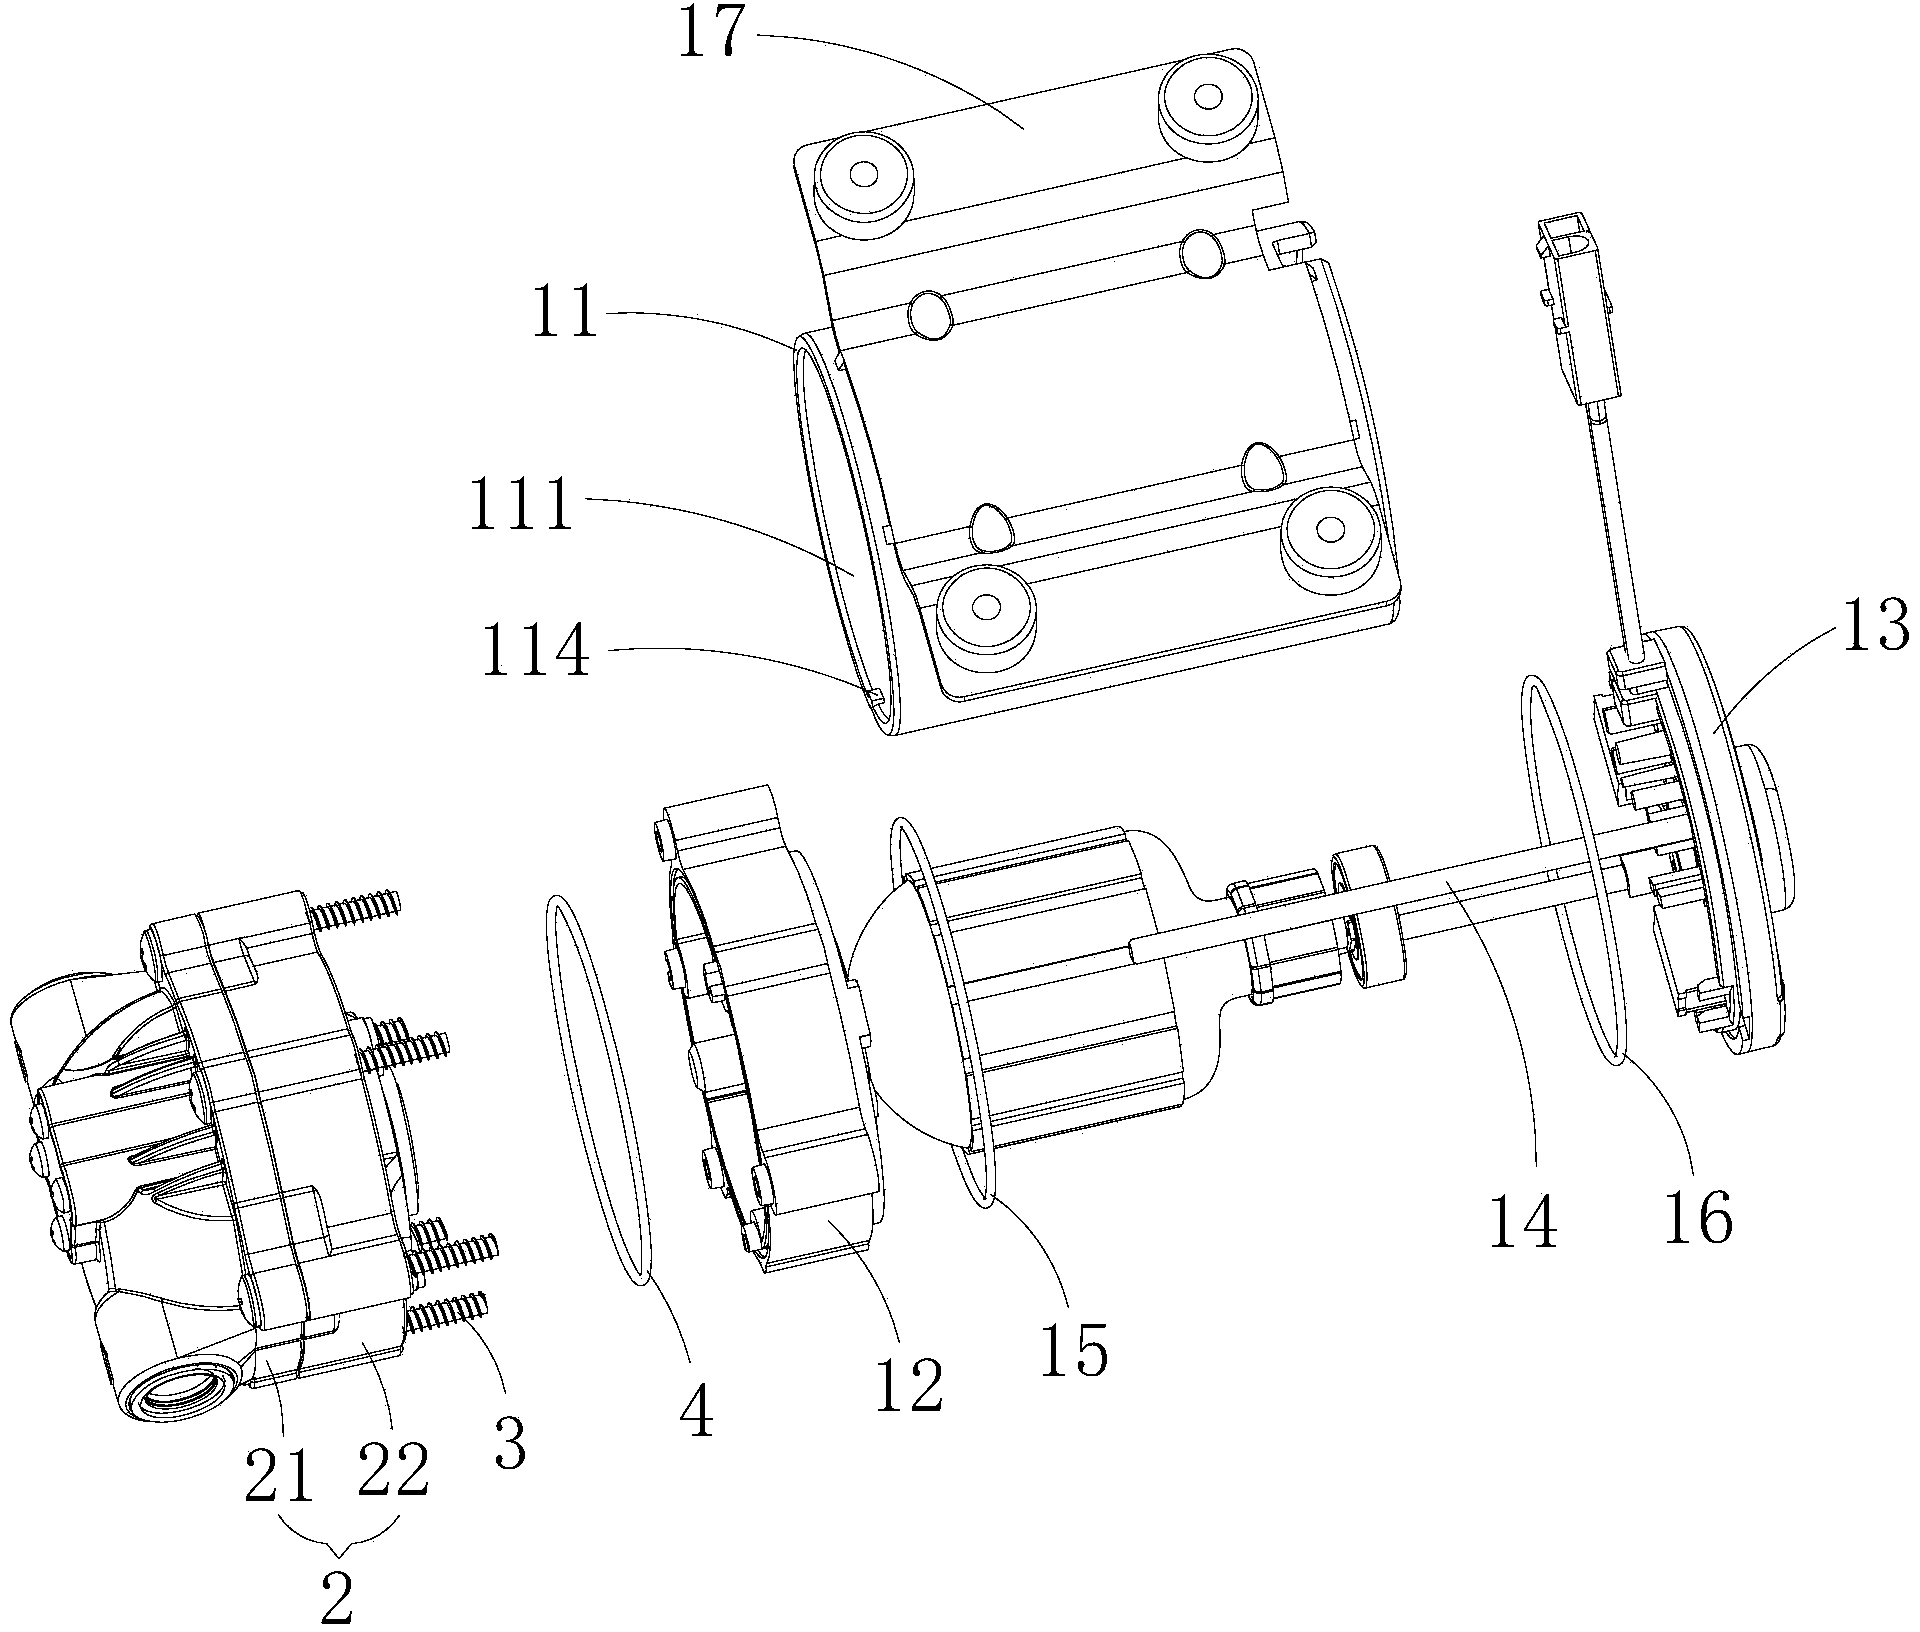 Motor of booster pump and booster pump with the same